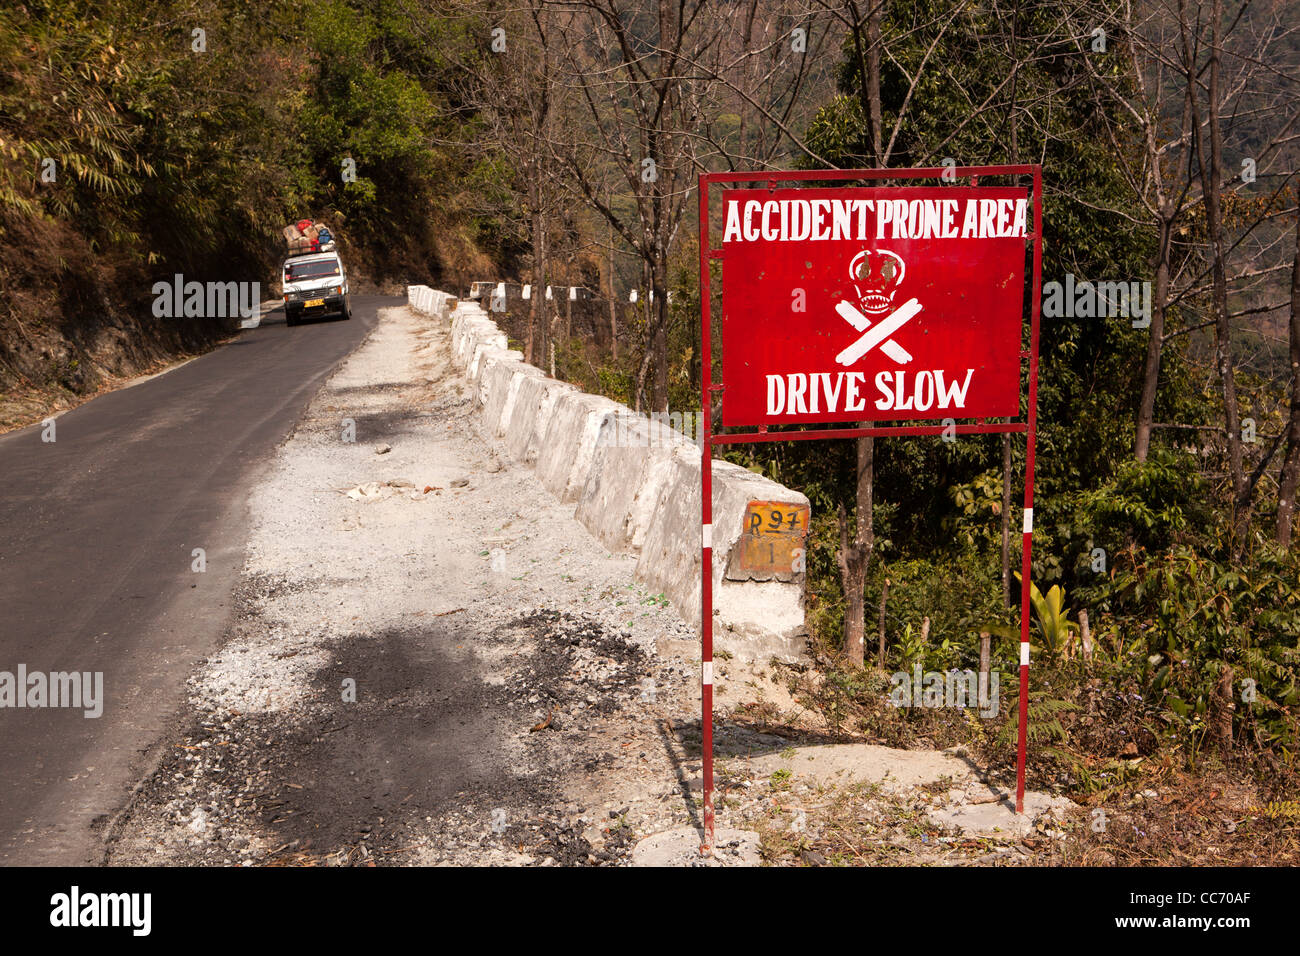 India, Arunachal Pradesh, West Kameng, district, accident prone area warning sign on road through Himalayan foothills Stock Photo